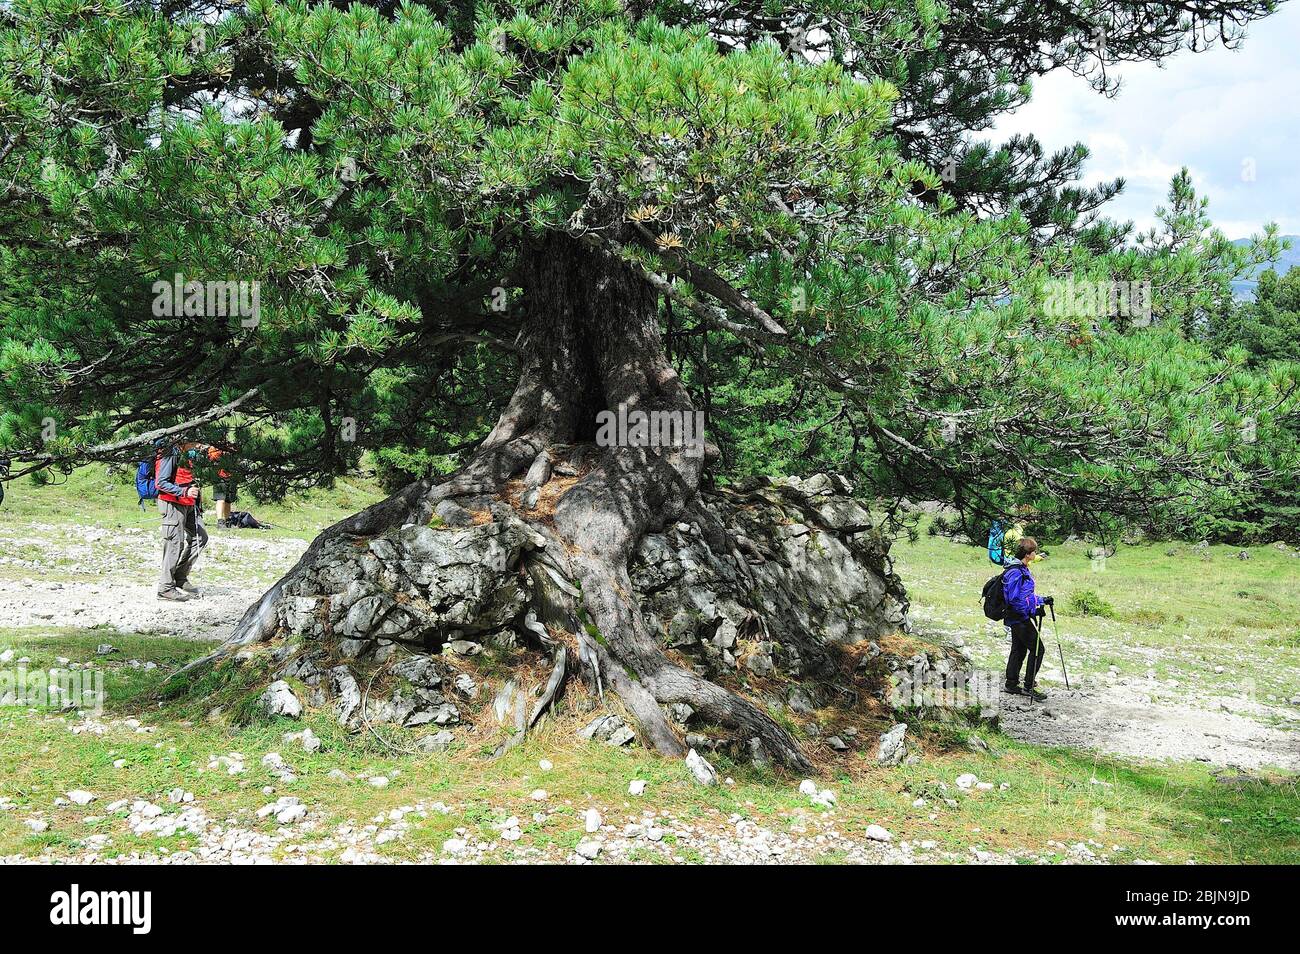 An old pine tree embedded in the rock in the Dolomites. They are a mountain range declared a UNESCO World Heritage Site. Trentino province, Italy Stock Photo